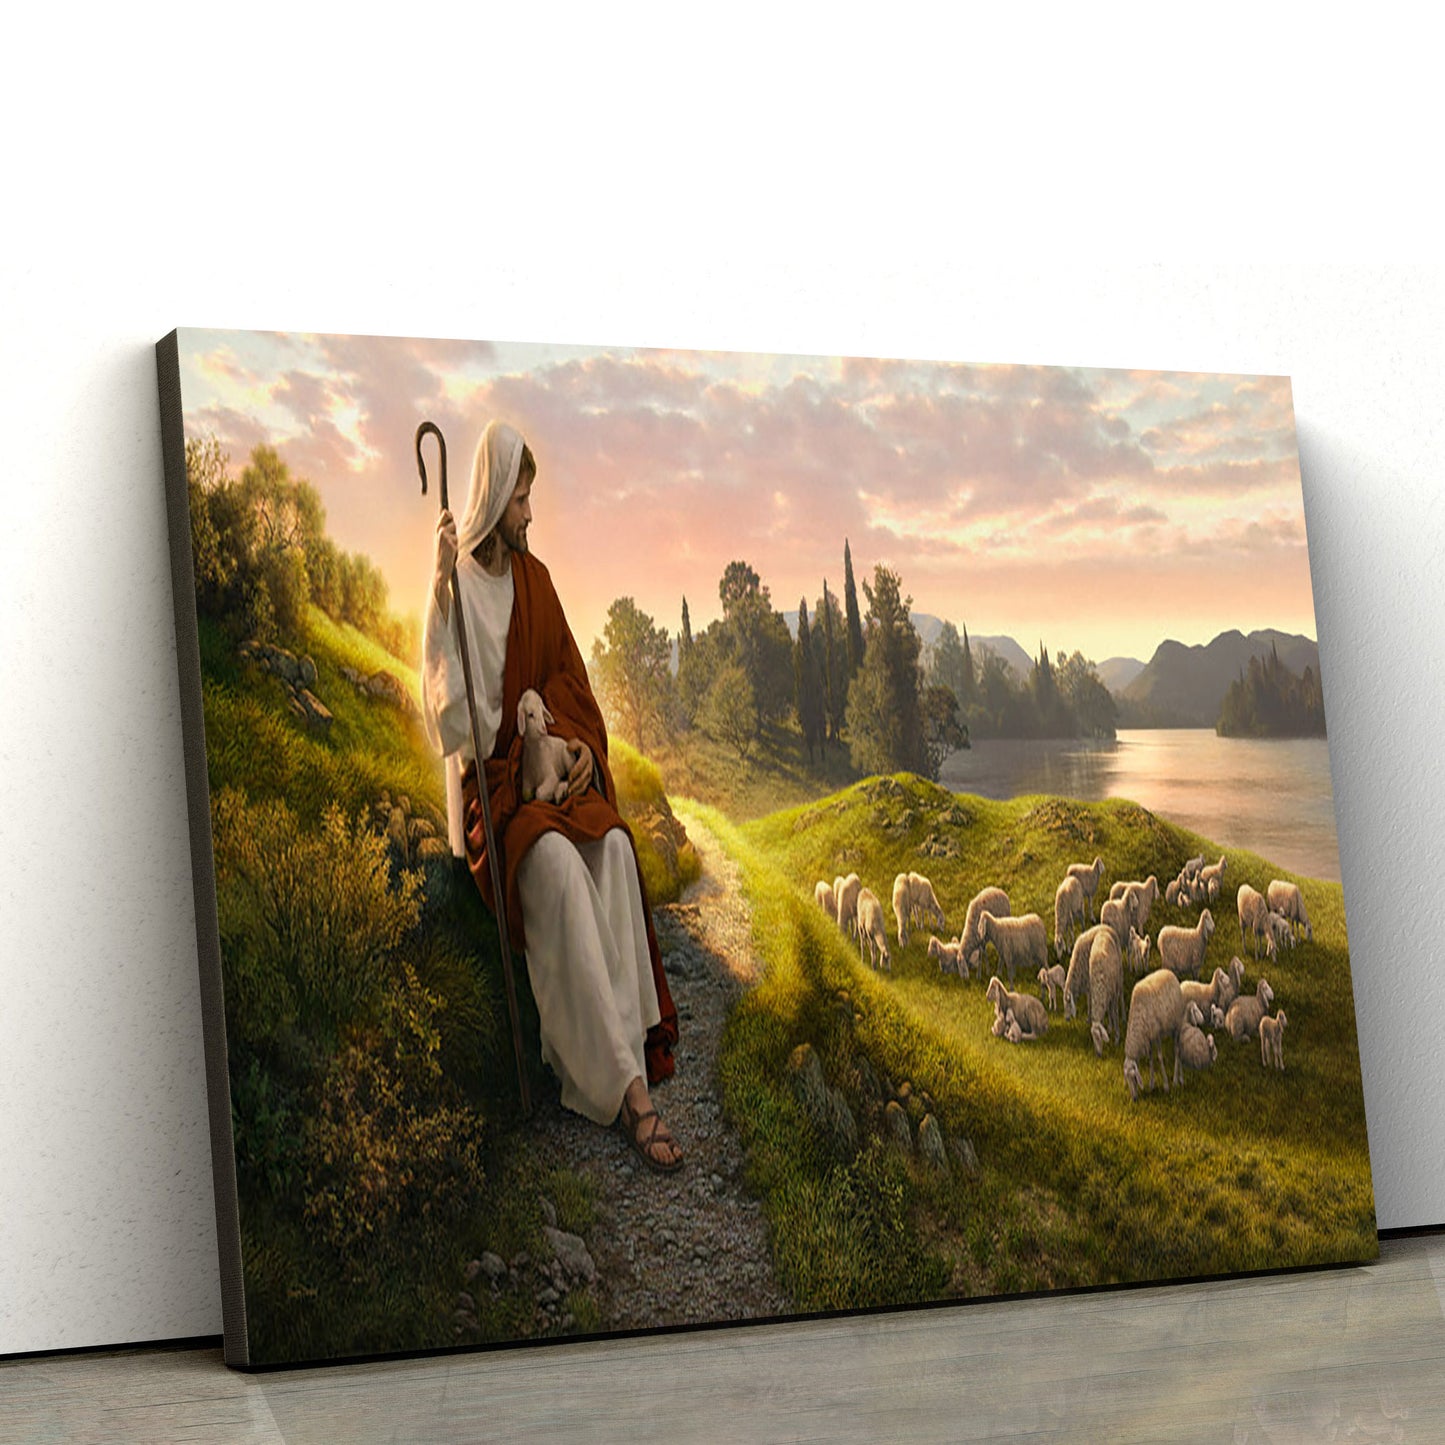 Dear To The Heart Of The Shepherd  Canvas Picture - Jesus Christ Canvas Art - Christian Wall Art